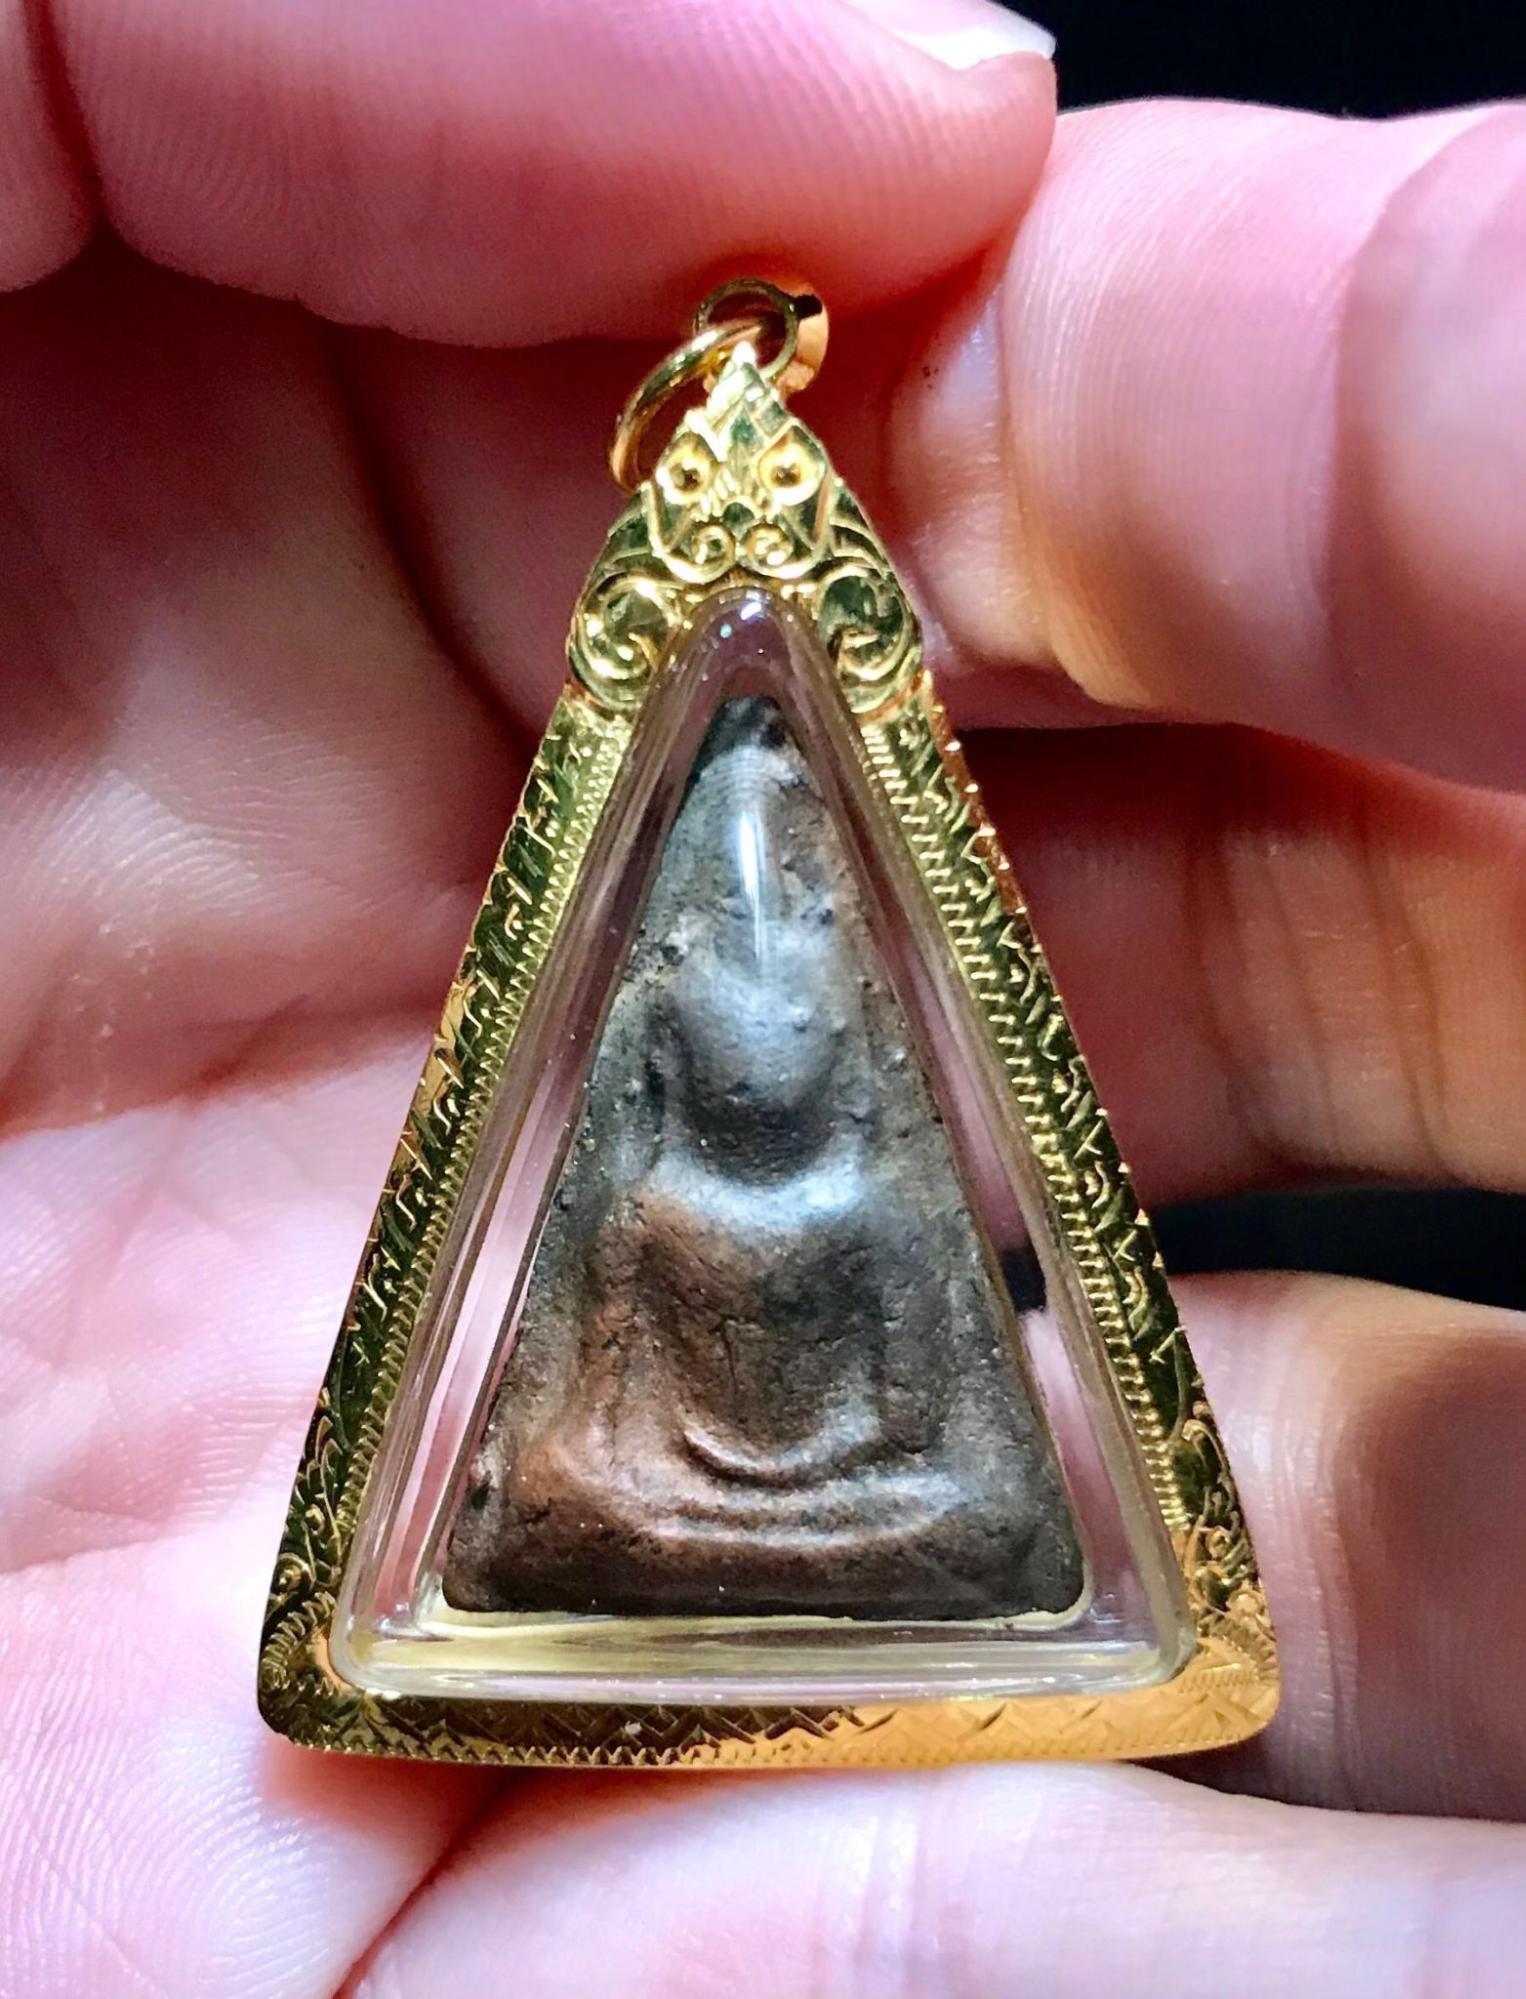 NEW E-NANG-NGUA-THAI-GENIUS-BUDDHA AMALET FROM THAILAND FOR LUCKY RICH THAILAND 